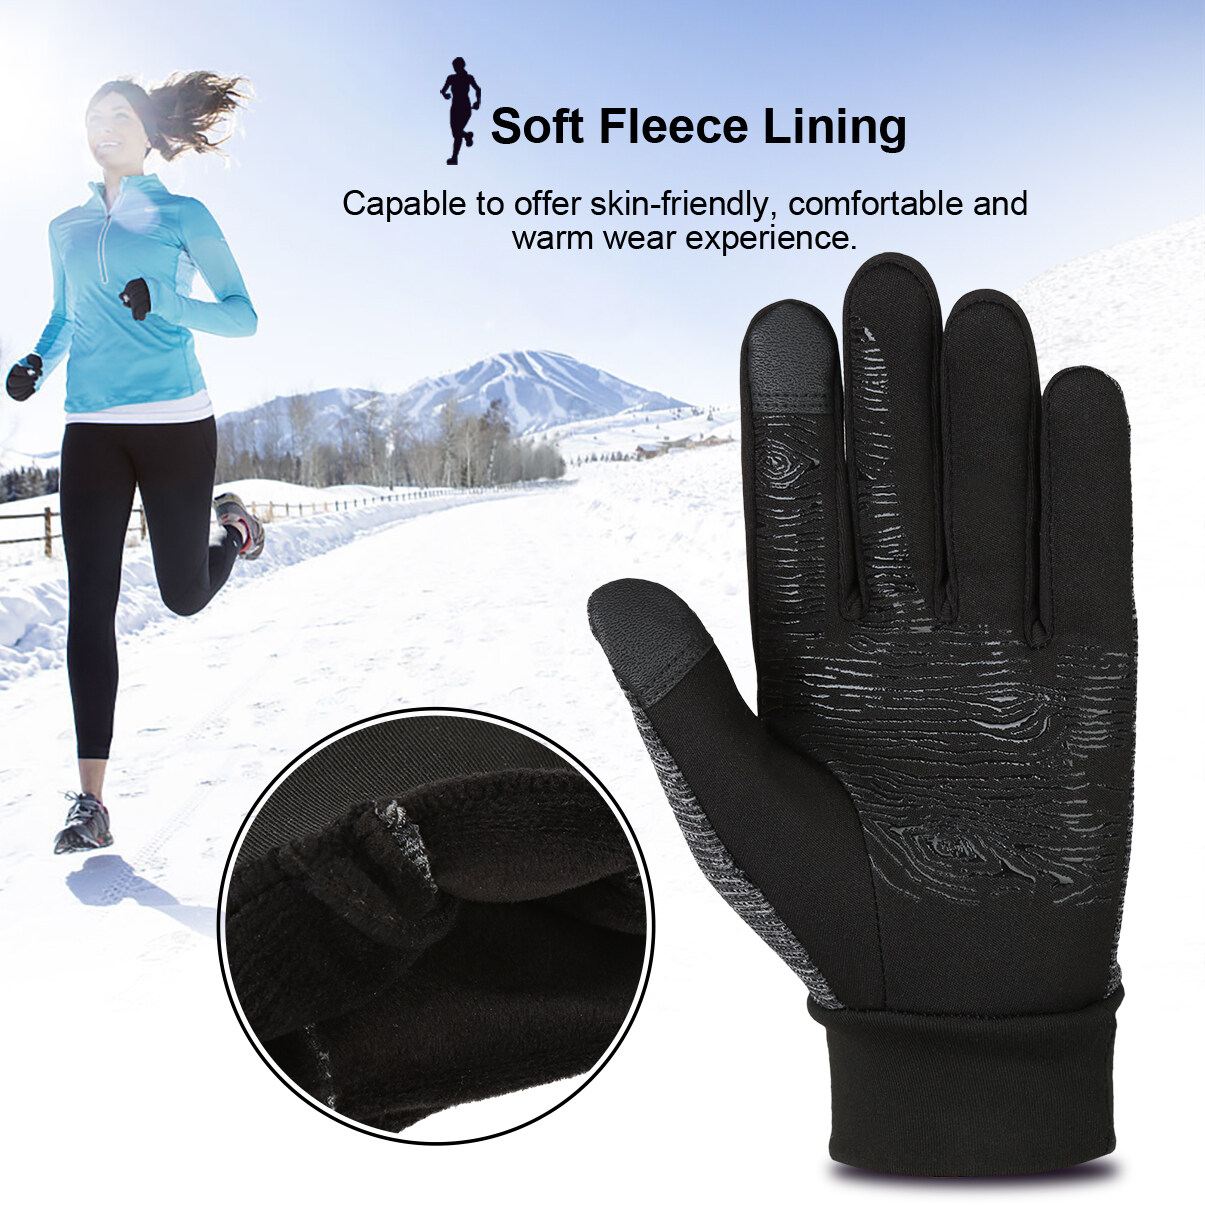 Winter Gloves for Men Women Windproof Warm Gloves Non-Slip Thermal Touchscreen Gloves Casual Gloves for Hiking Cycling Skiing Running, M & Black - image 2 of 9